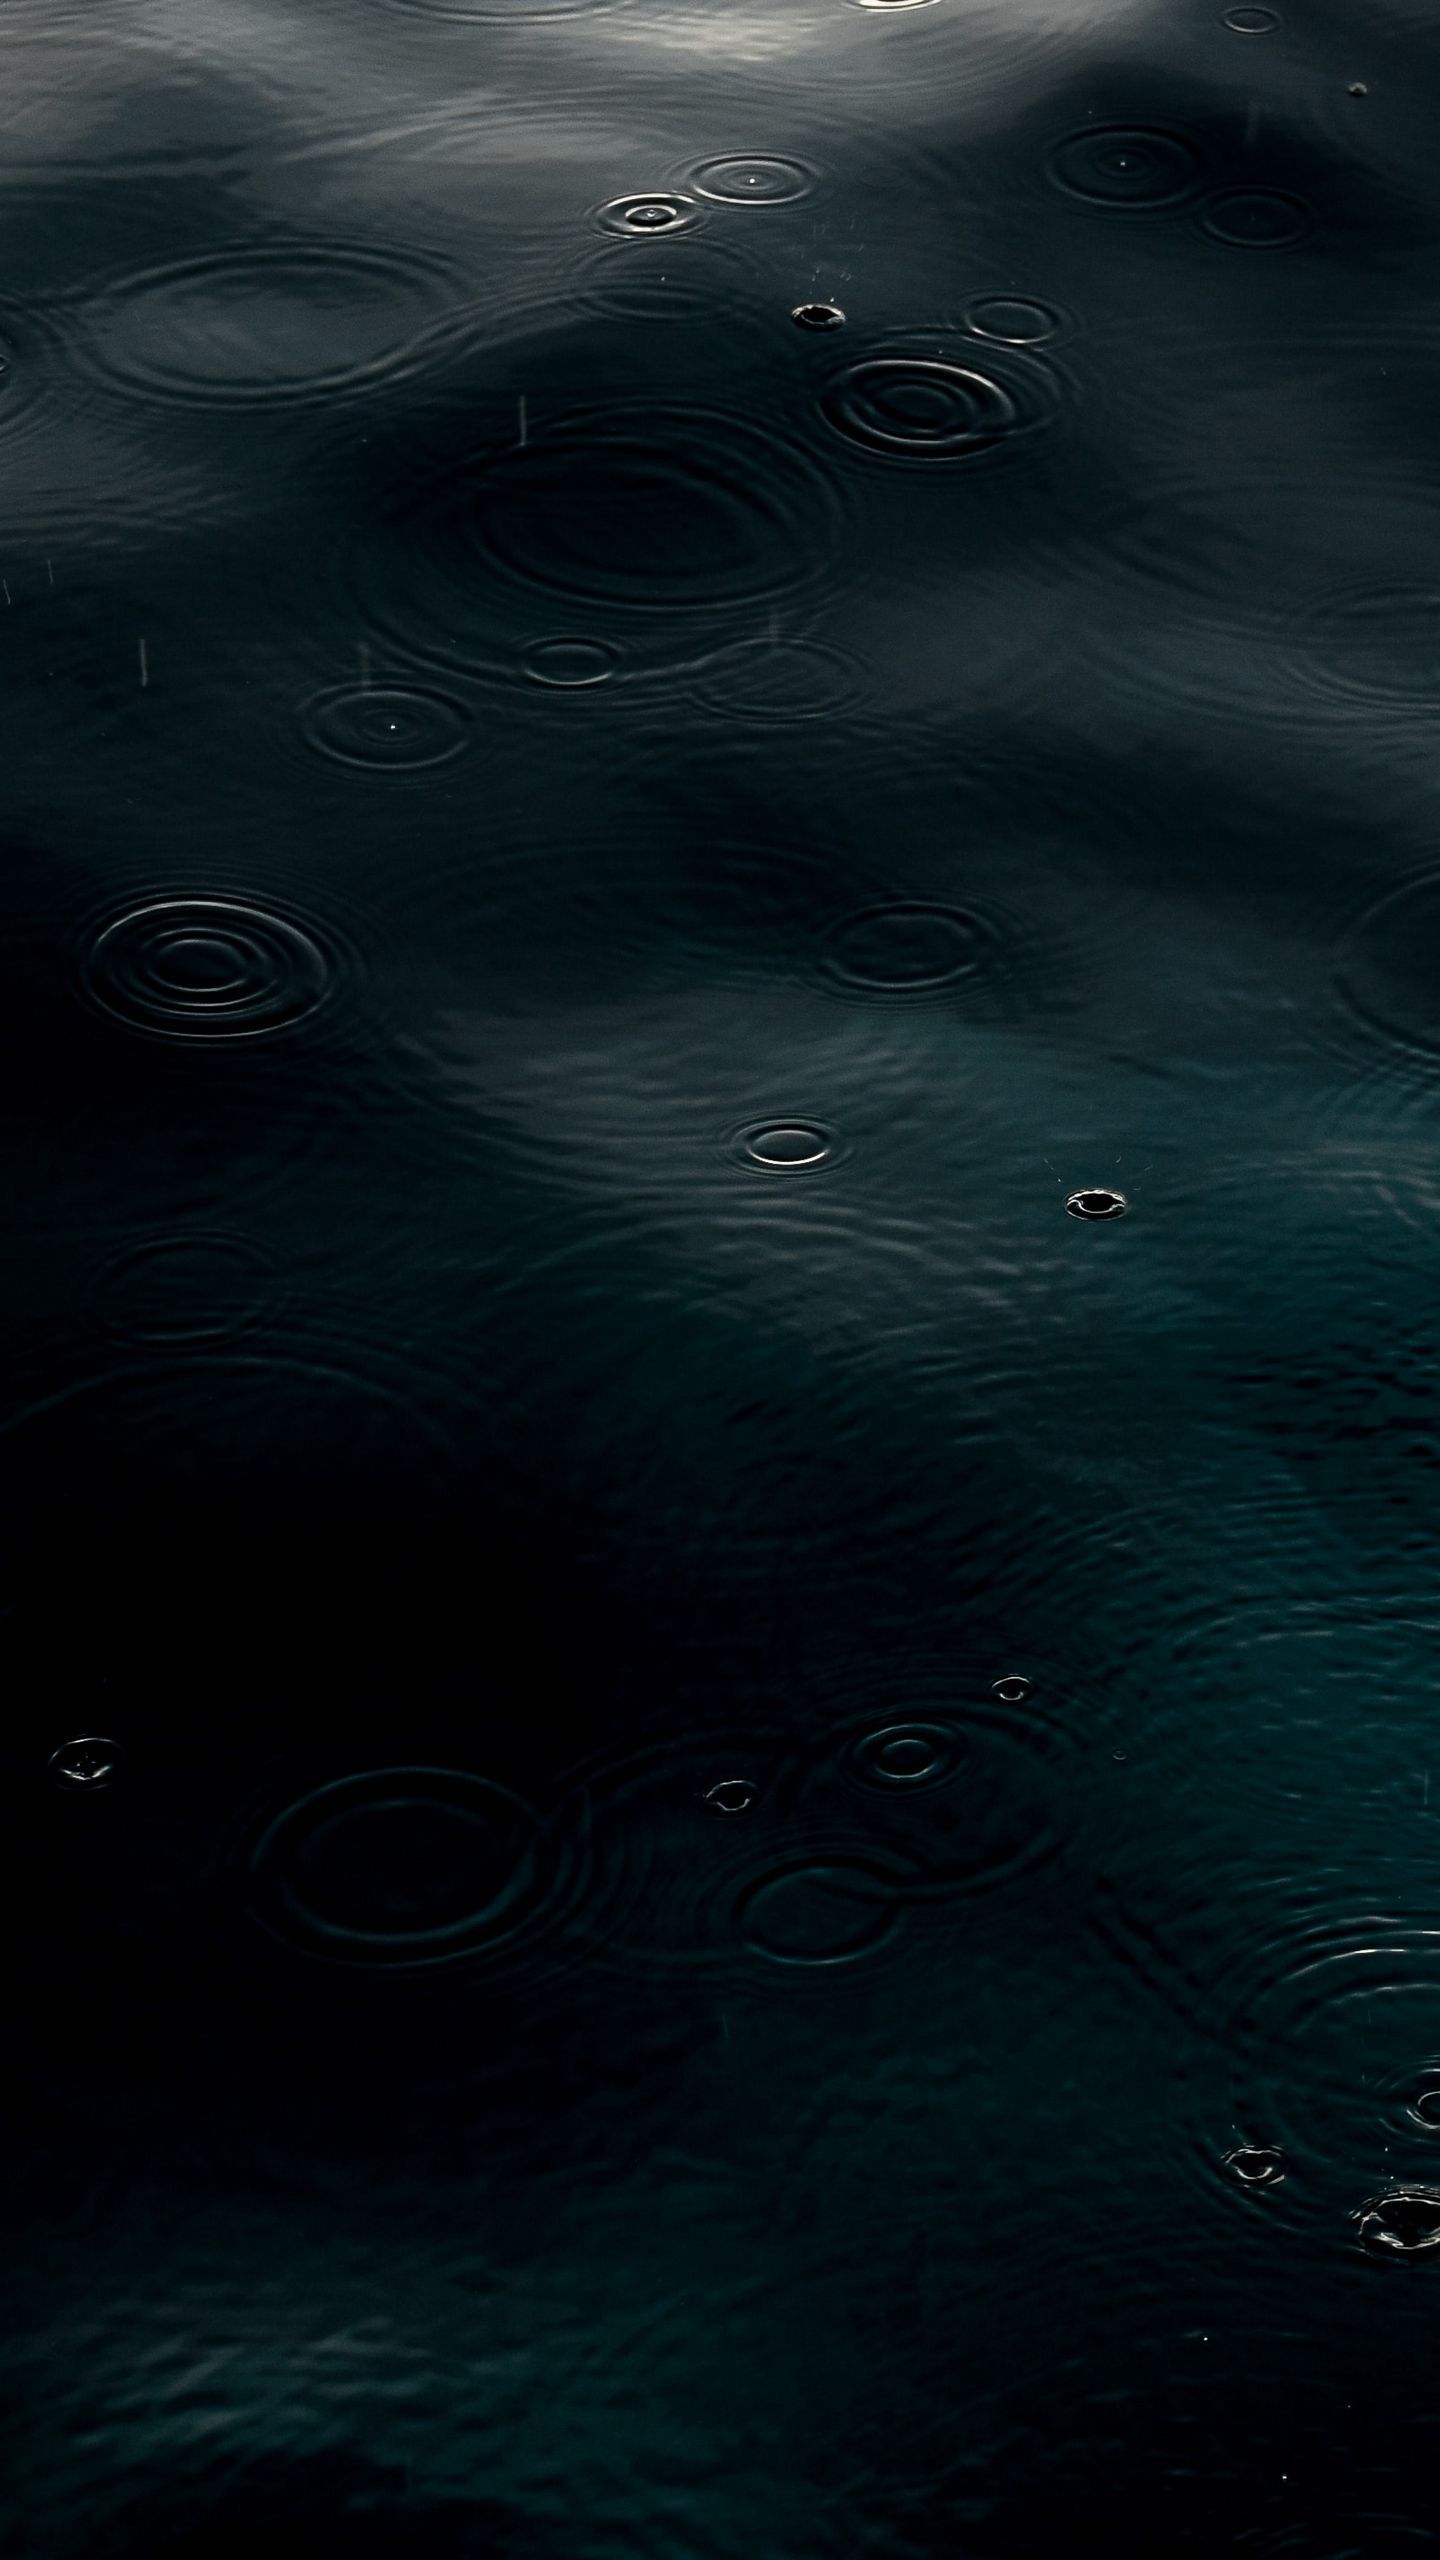 Dark blue water with ripples and circles from raindrops - Water